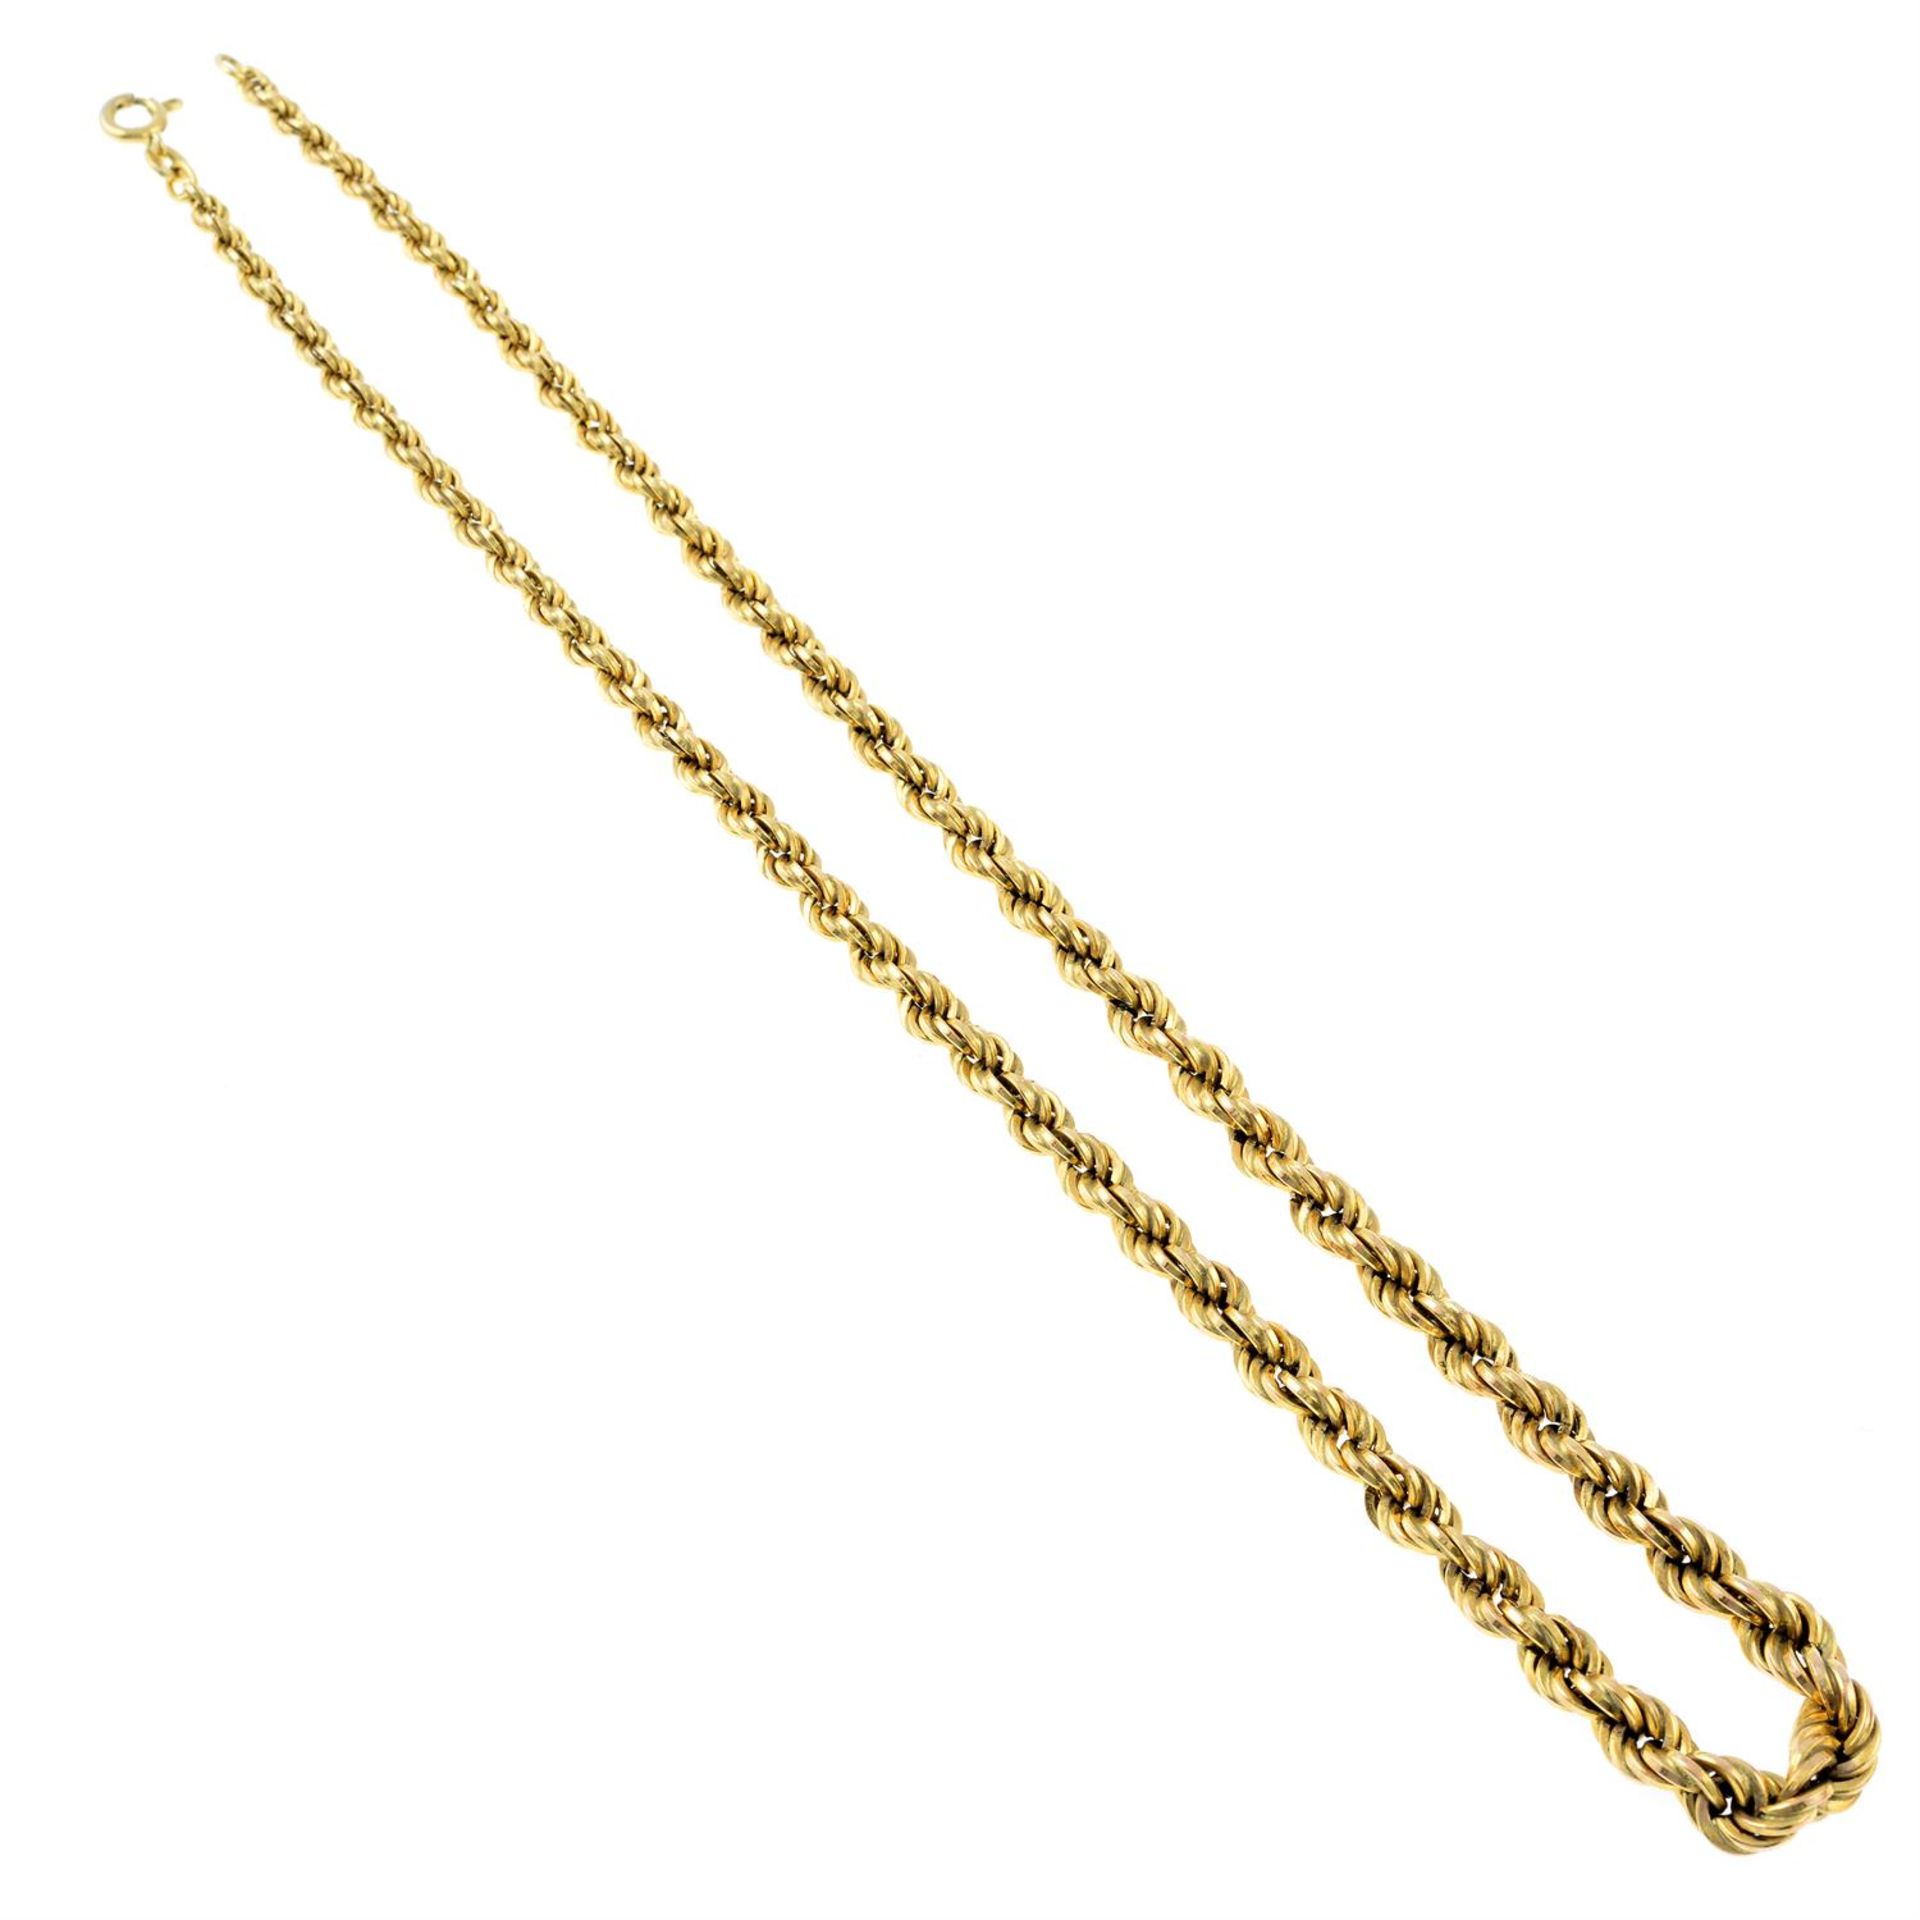 A 9ct gold graduated rope-link necklace.